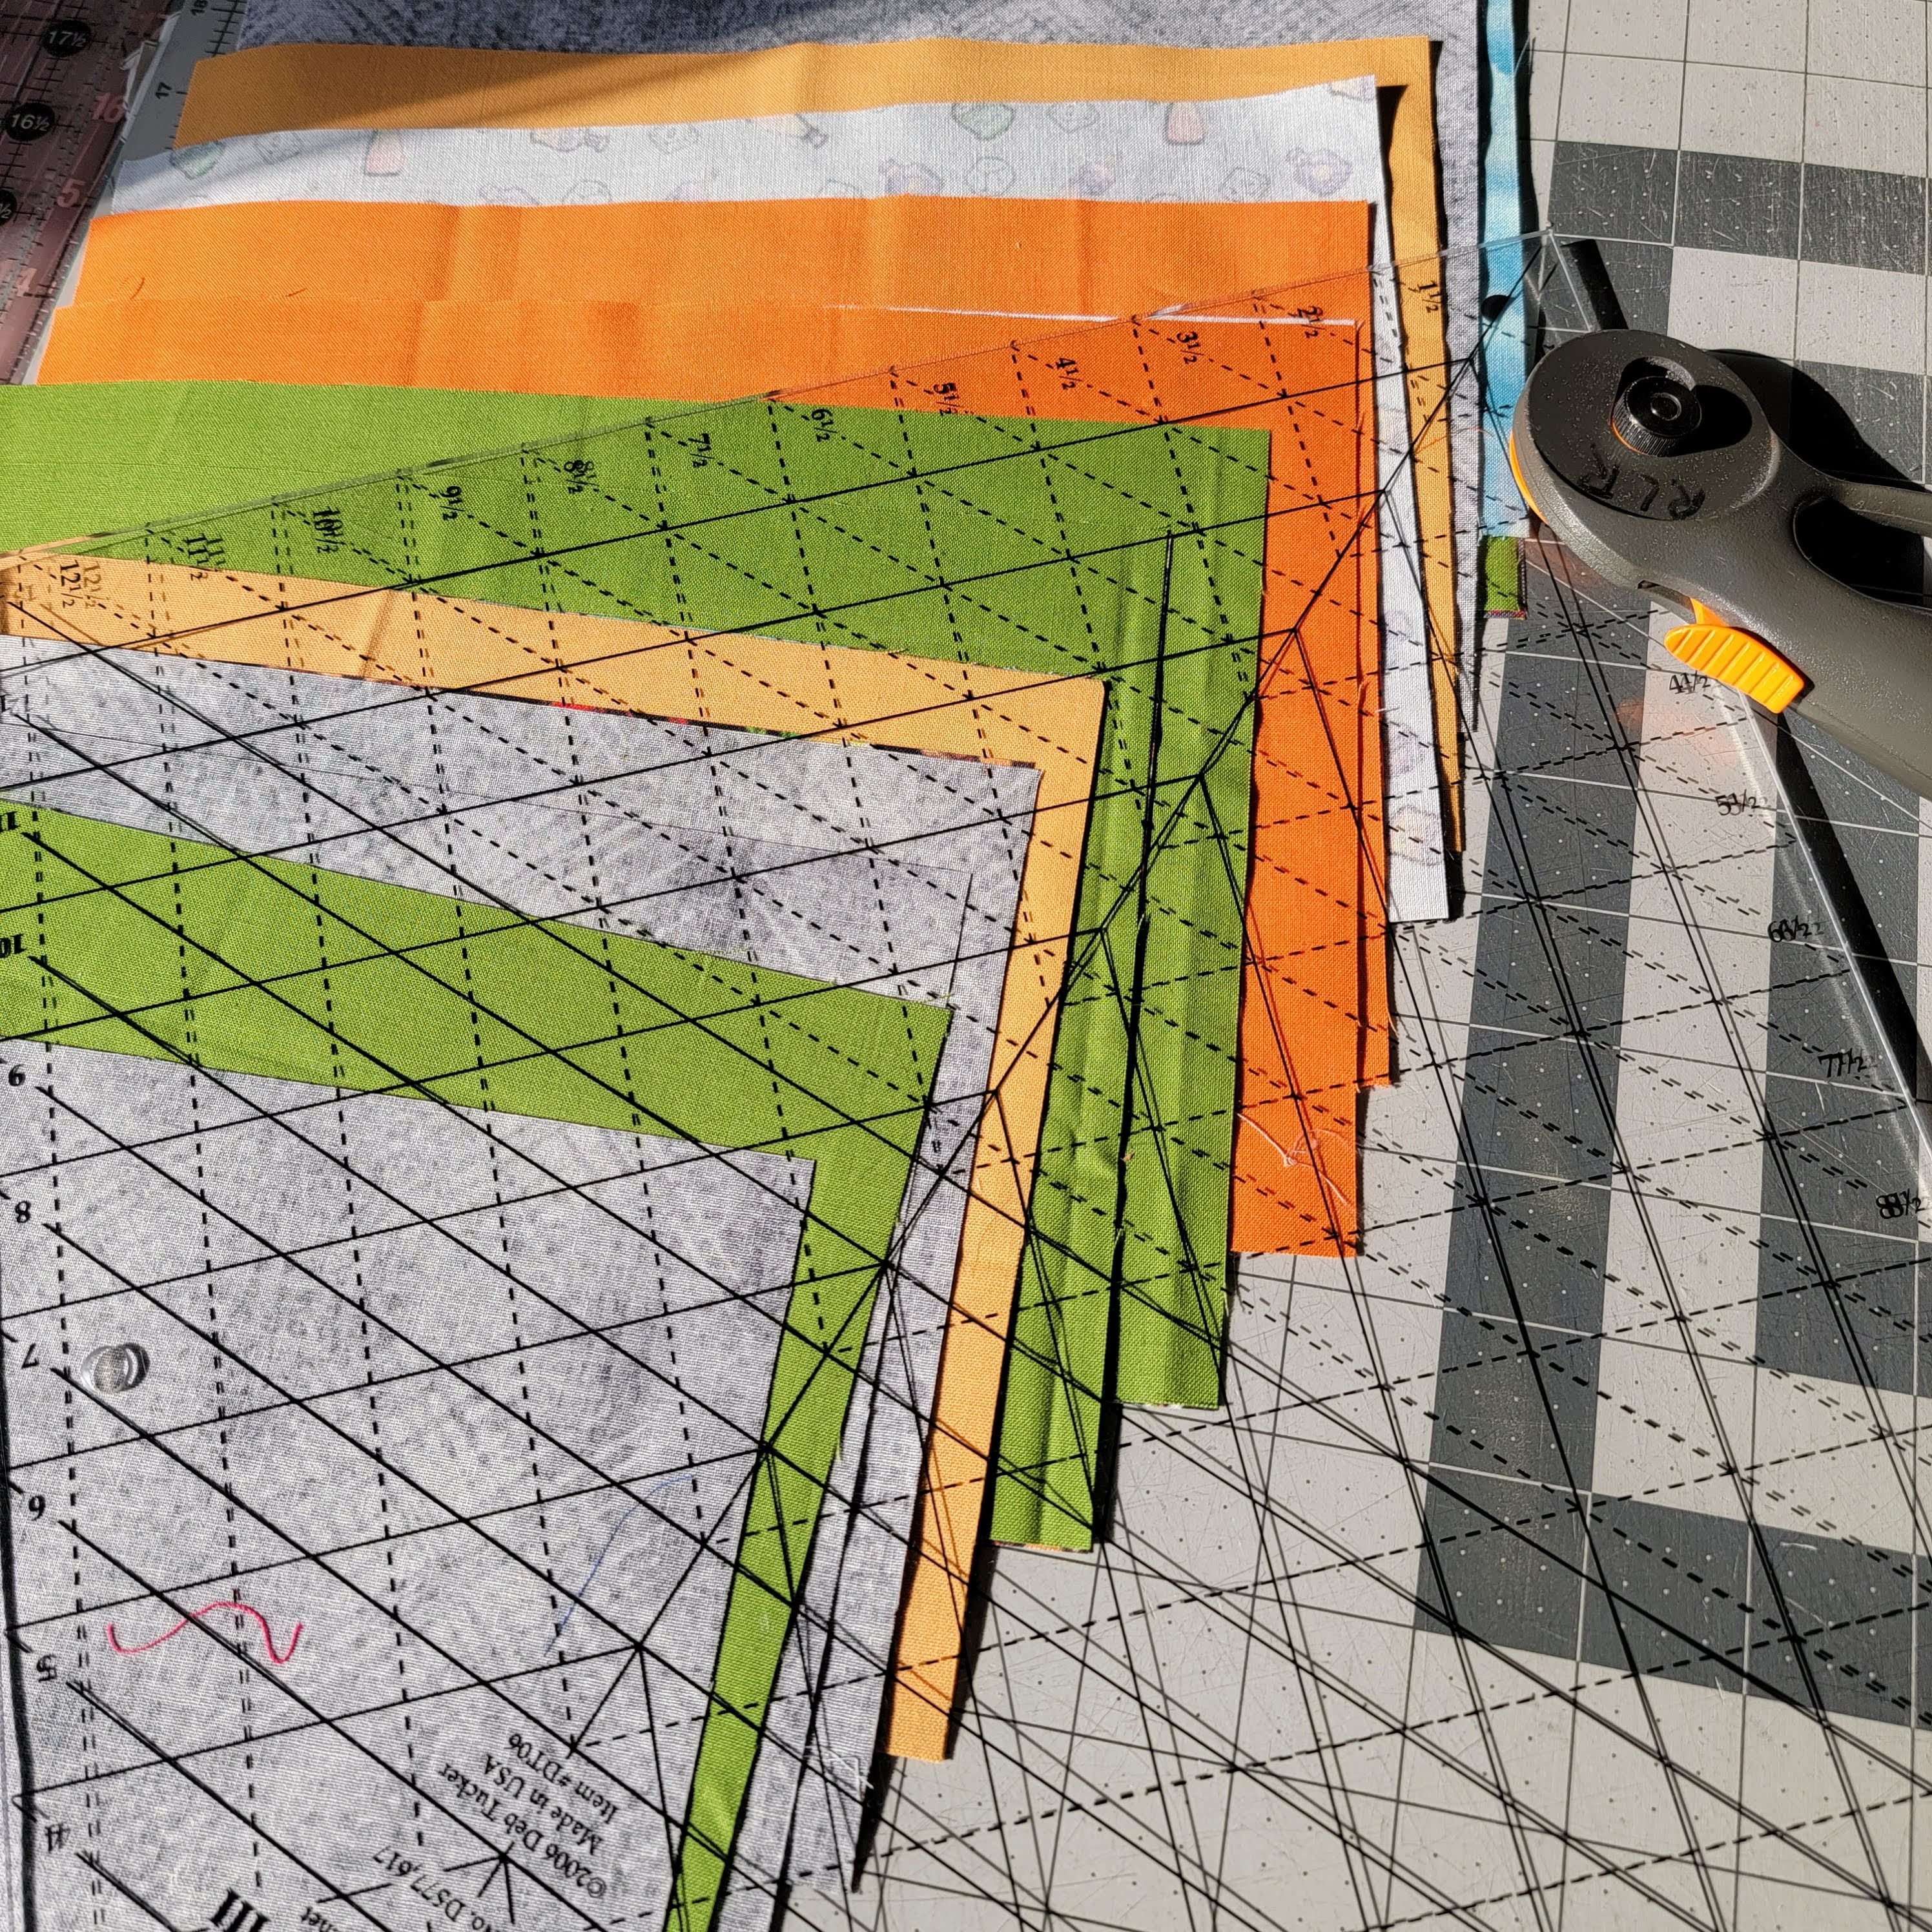 Cutting Triangles using your ruler! - The Sassy Quilter